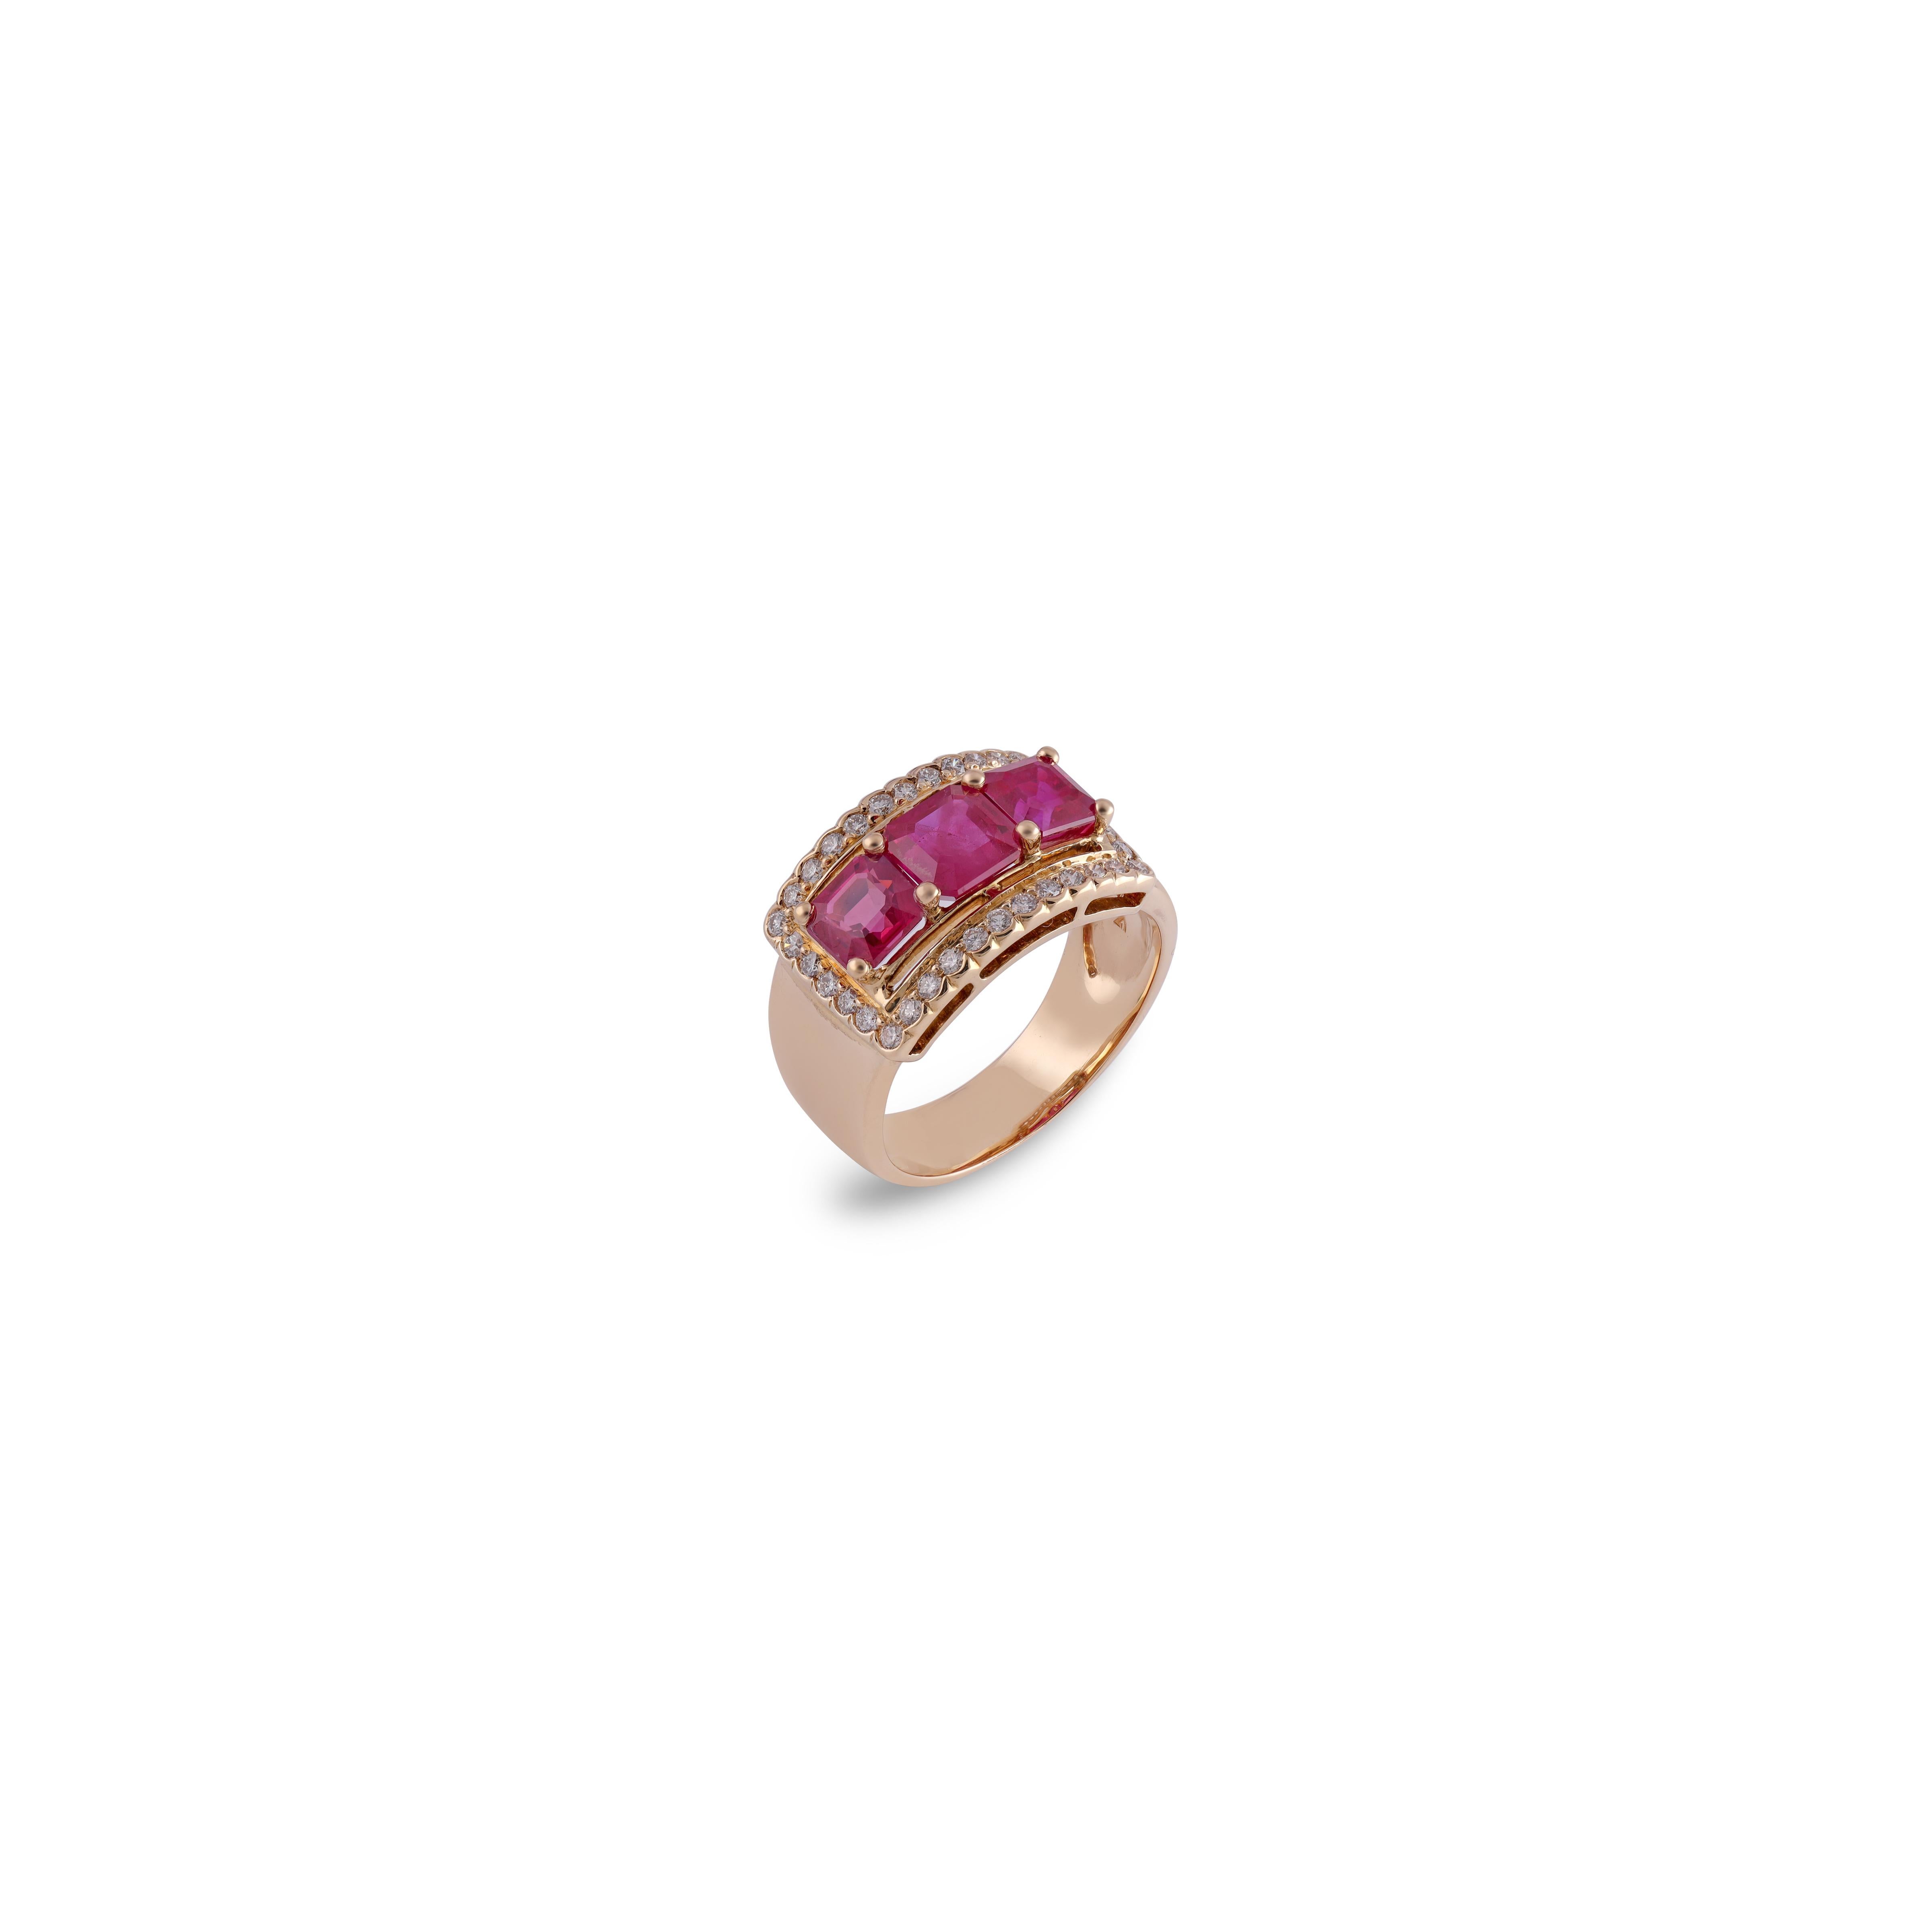 Octagon Cut 3 Stone Mozambique Ruby Cluster Wedding Ring 18k Gold For Sale